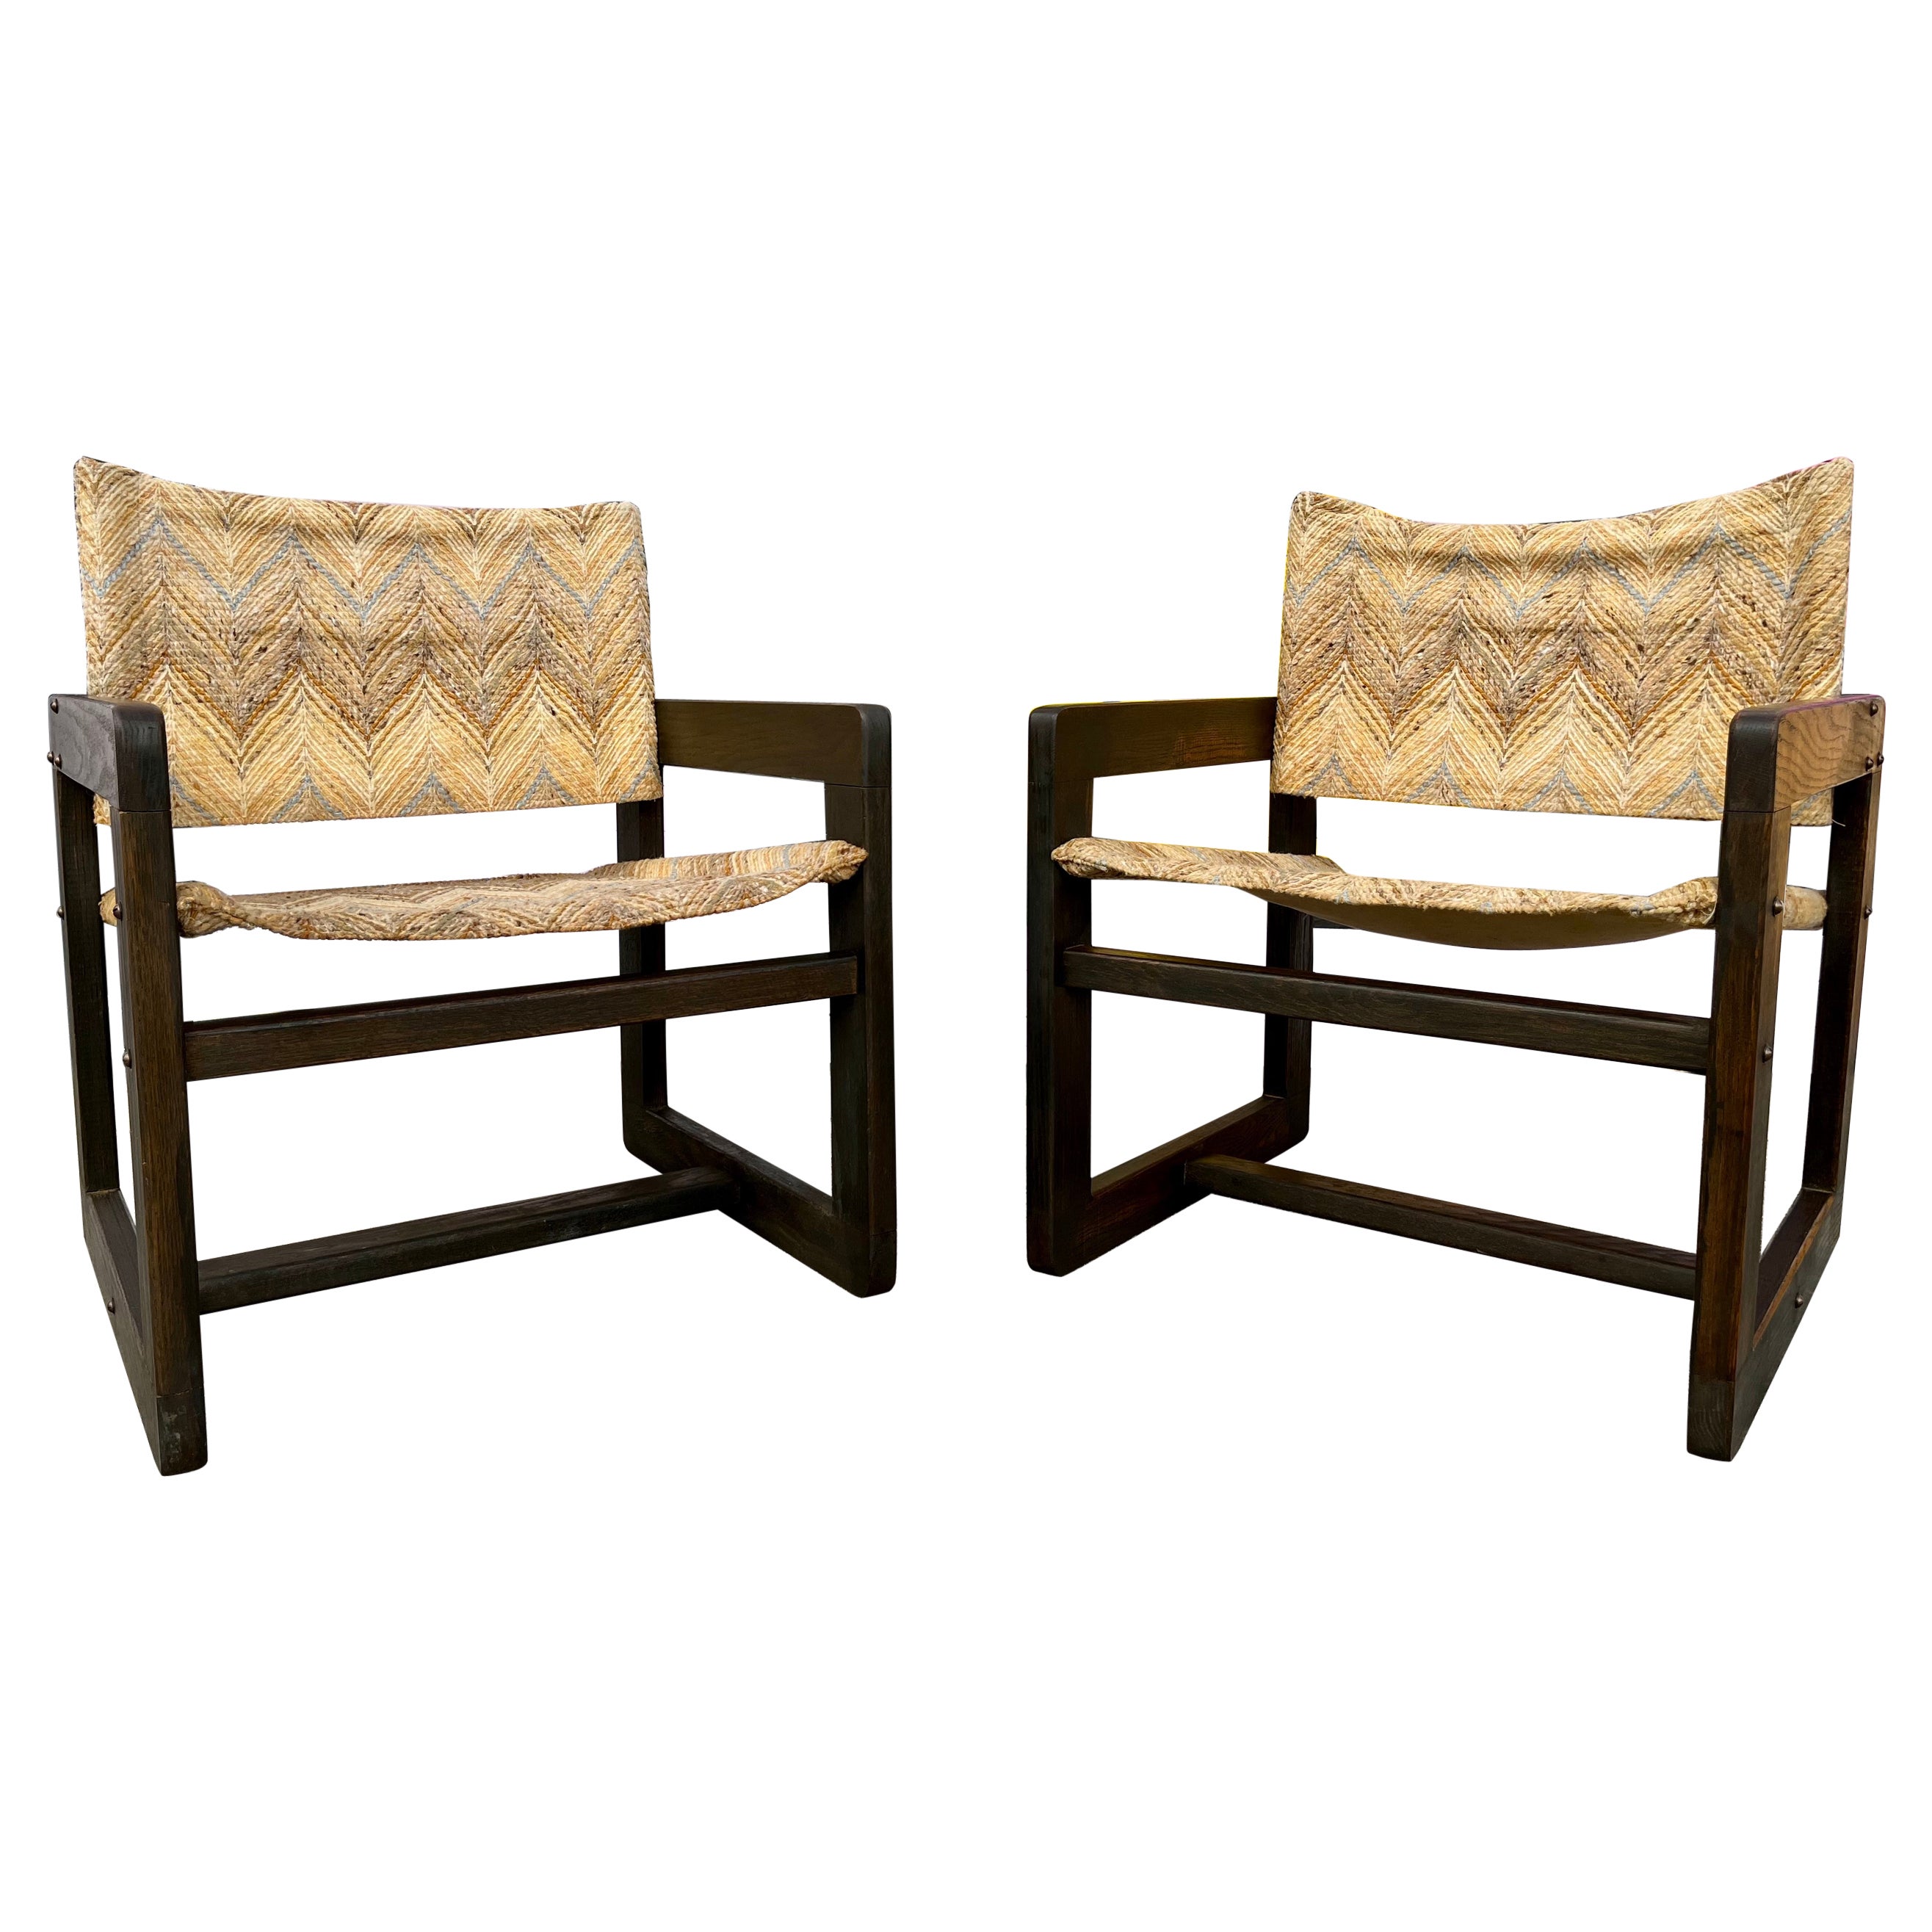 A Pair of Mid Century Modern Cube Lounge Chairs. Circa 1970s For Sale